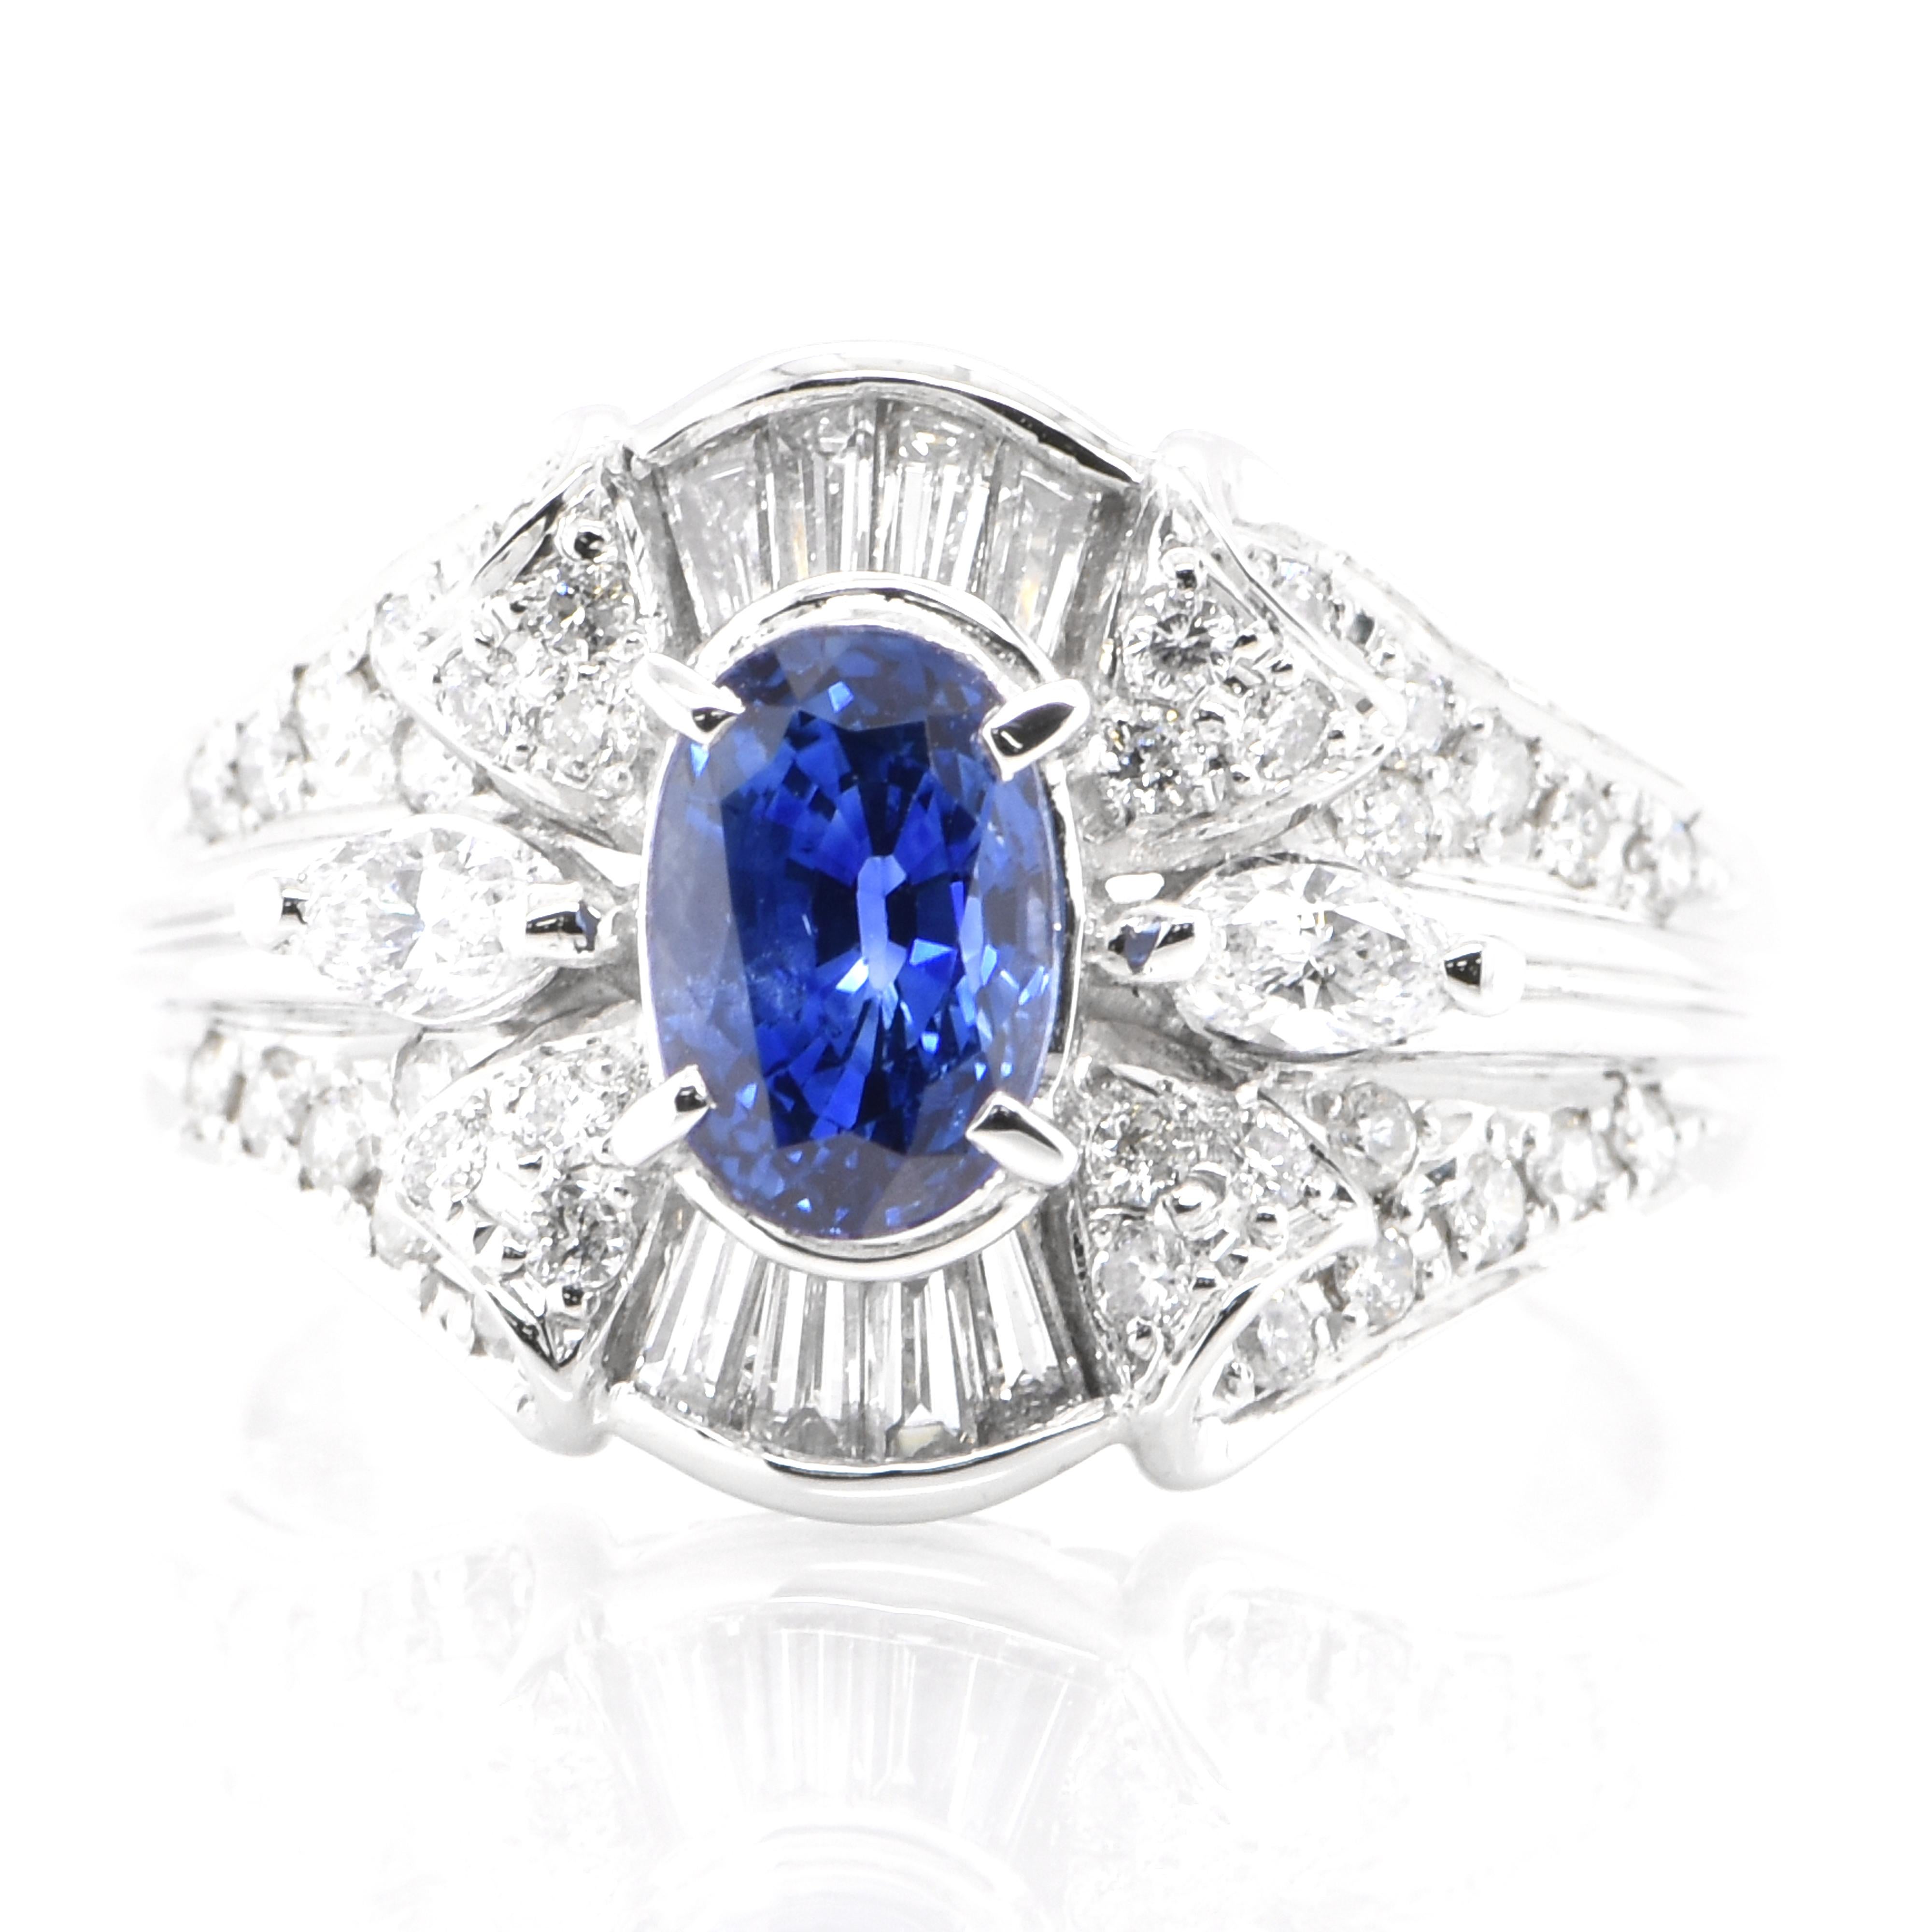 A beautiful ring featuring 1.46 Carat, Natural Sapphire and 0.81 Carats Diamond Accents set in Platinum. Sapphires have extraordinary durability - they excel in hardness as well as toughness and durability making them very popular in jewelry.